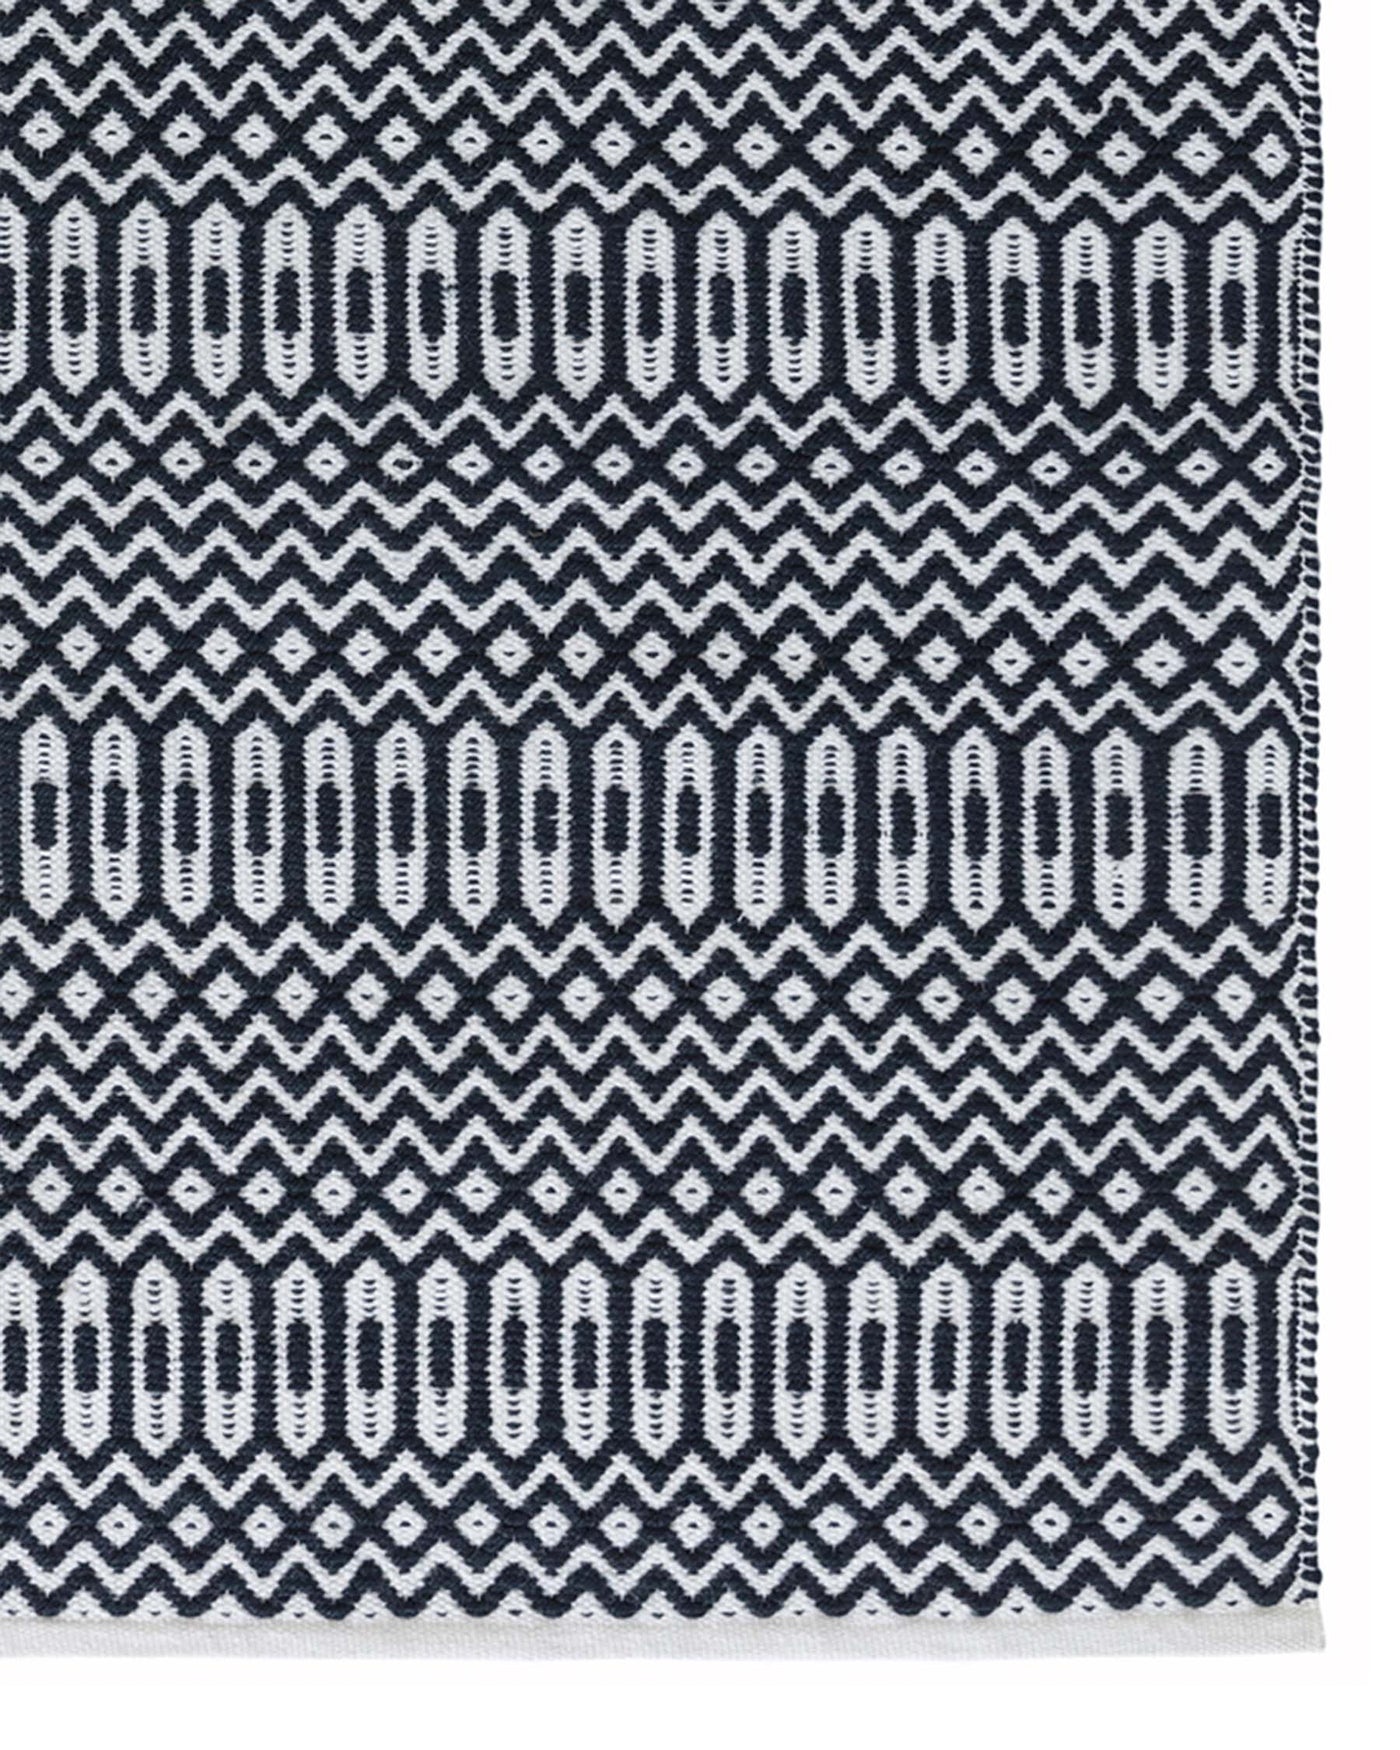 Textured area rug with geometric patterns in shades of dark blue and white.